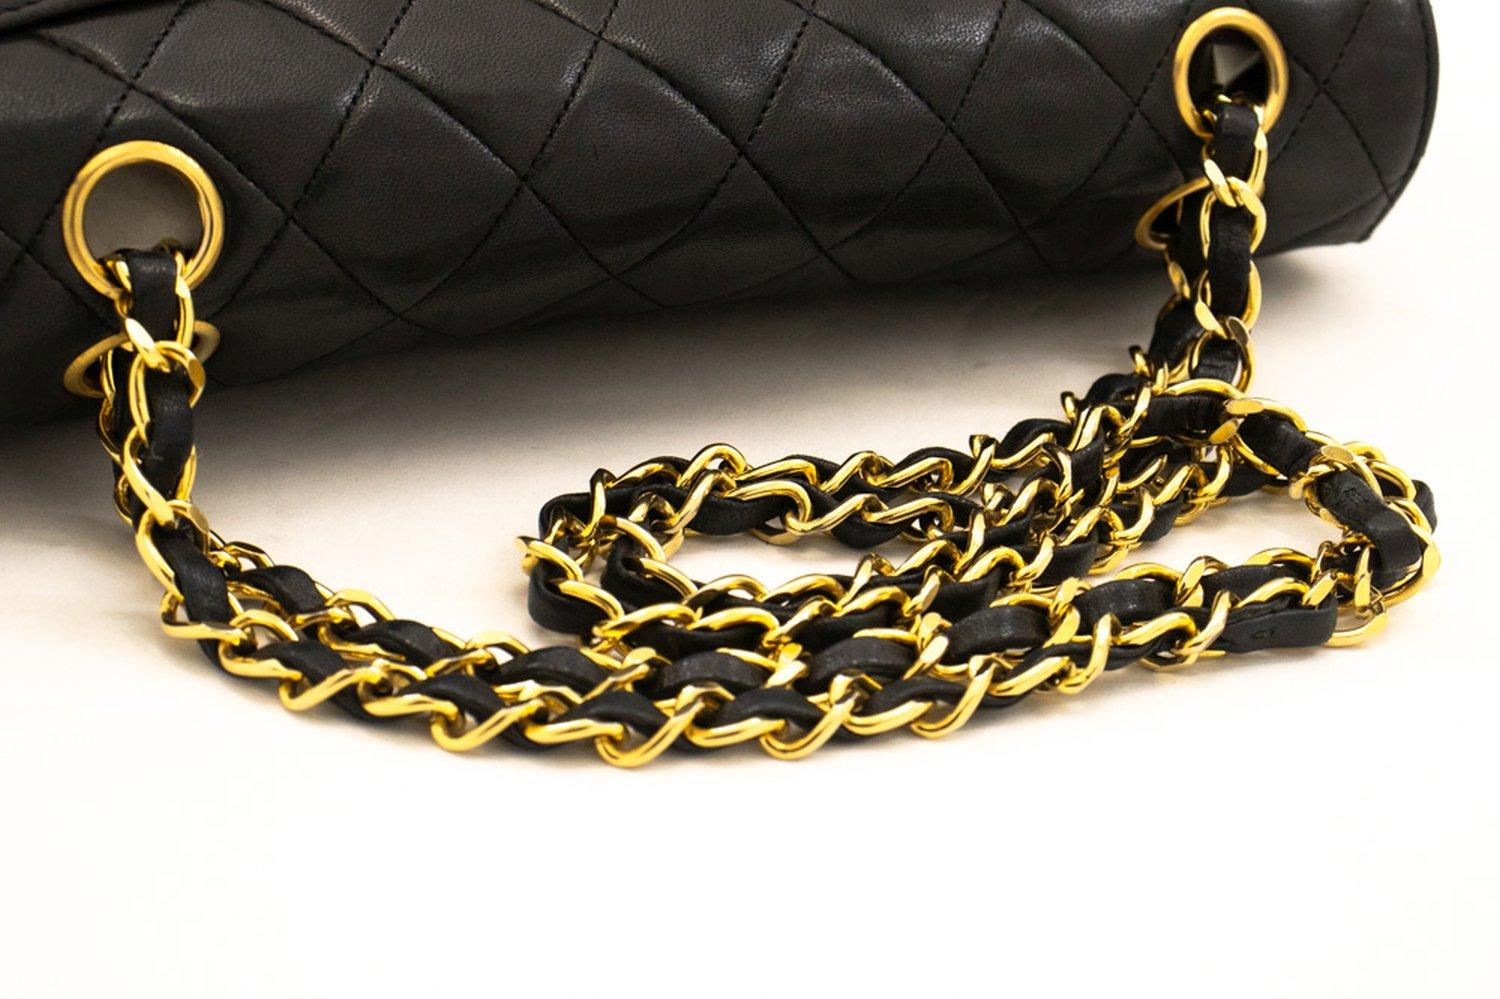 CHANEL Vintage Classic Chain Shoulder Bag Flap Quilted Lambskin 8